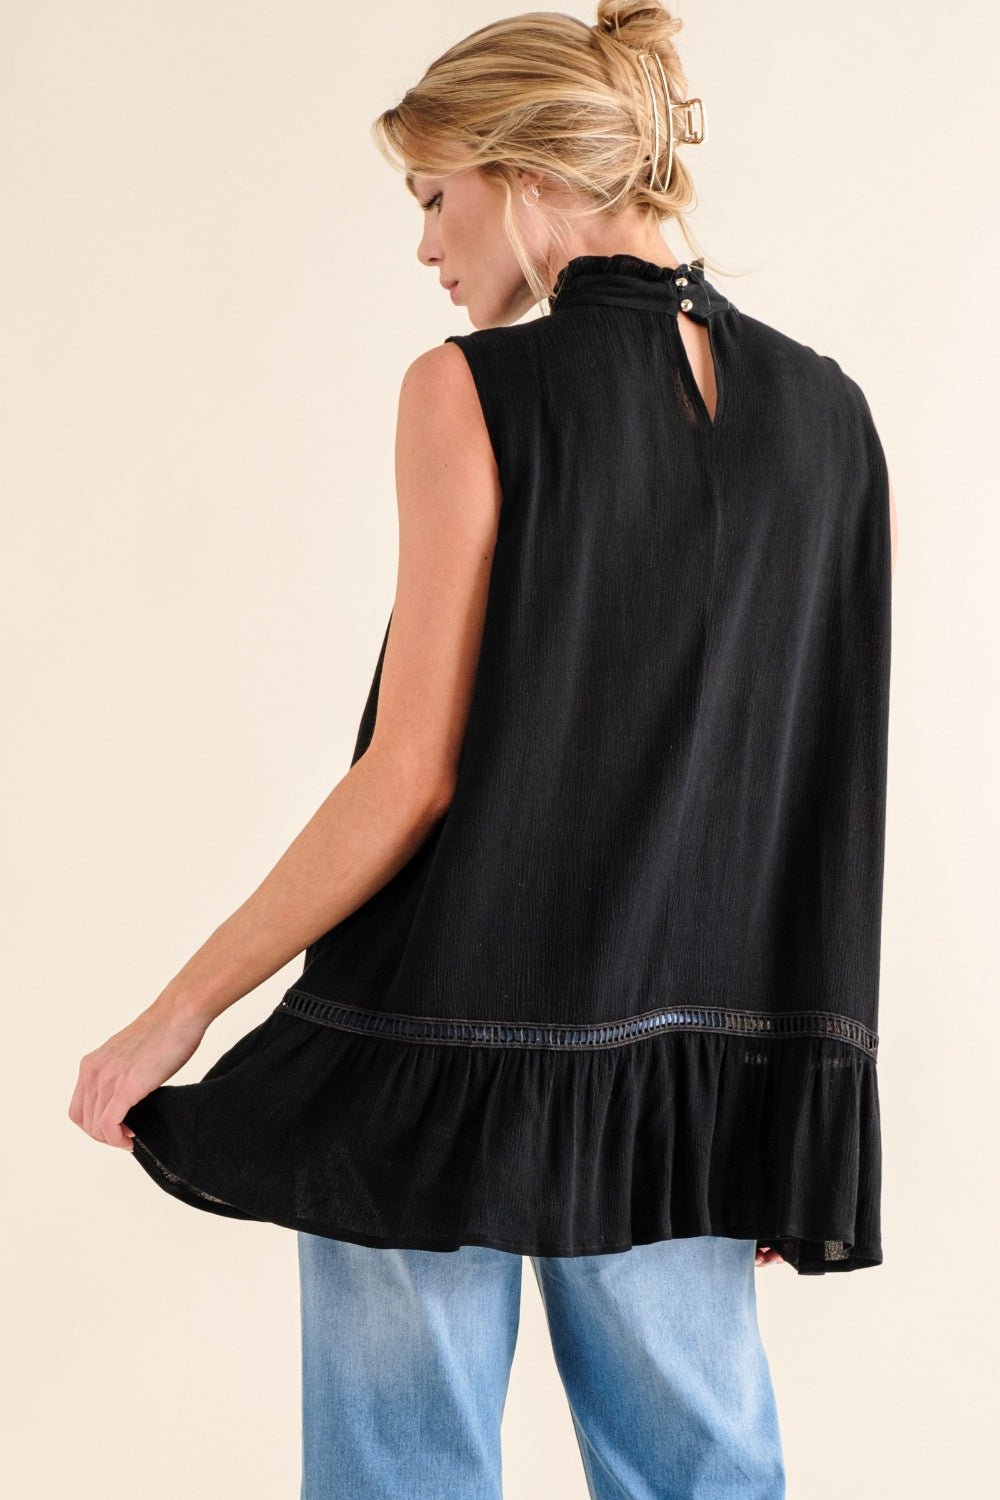 Lace Detail Sleeveless Peplum Top in BlackTopAnd the Why